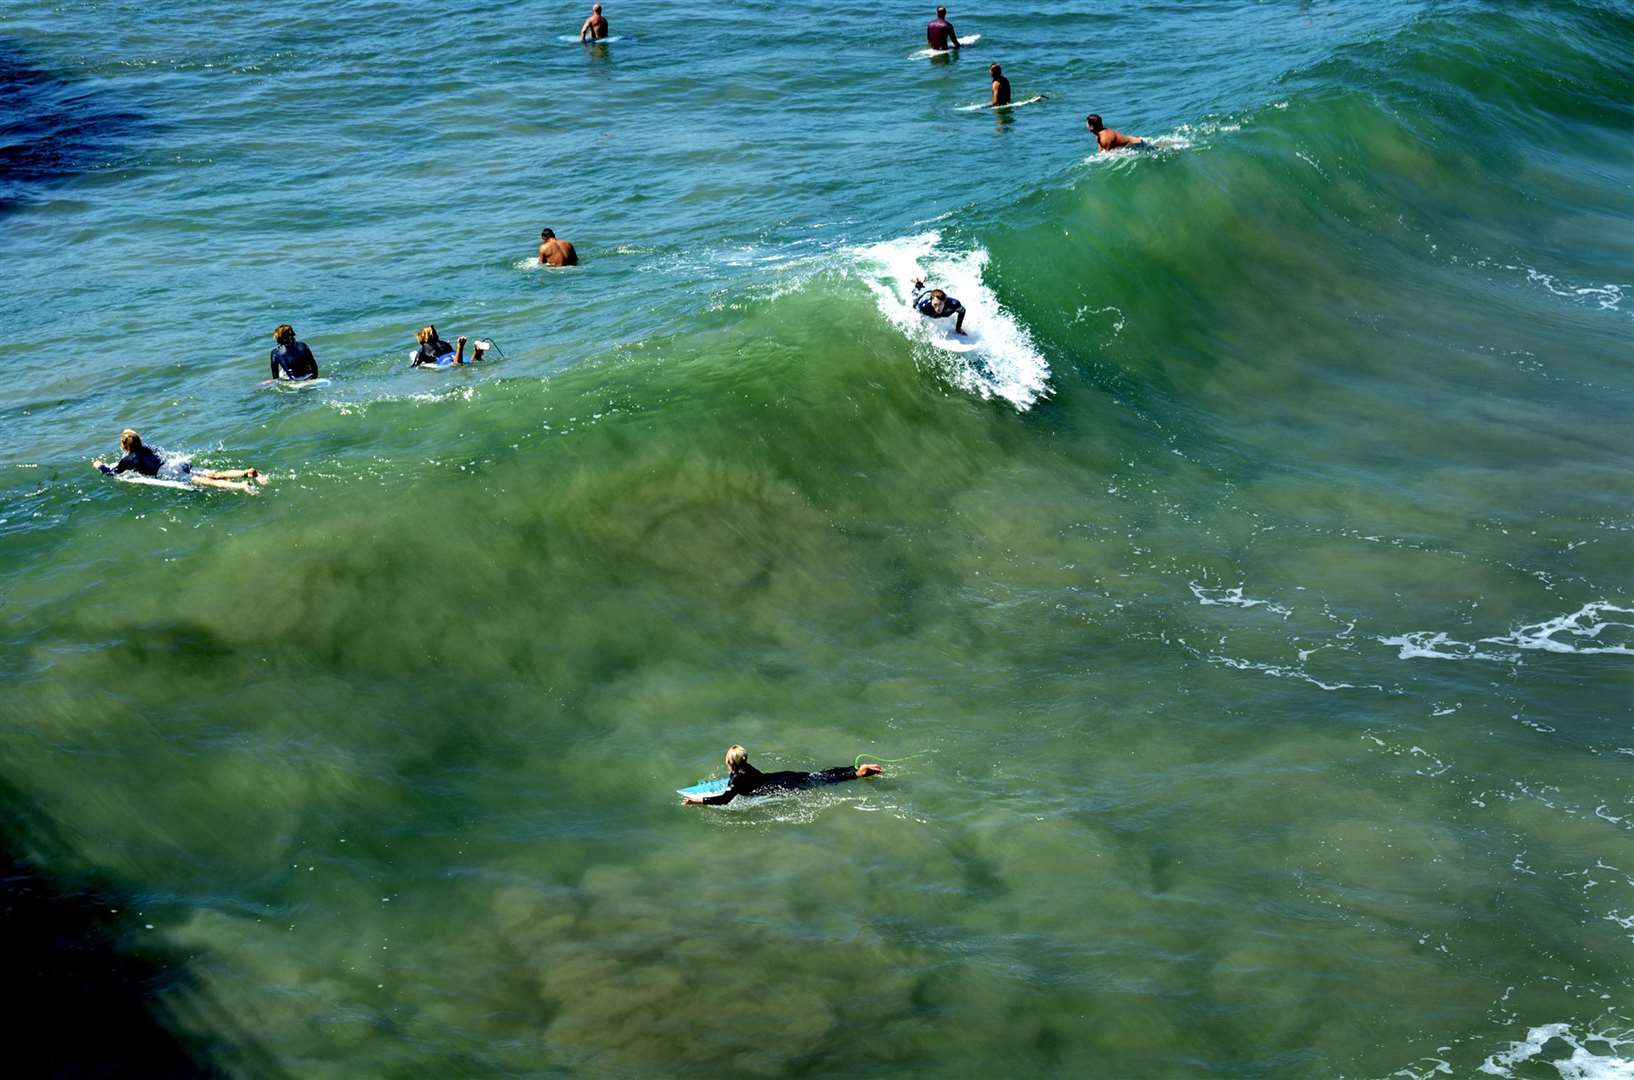 A surfer riding a wave in Huntington Beach. Picture: iStock/PA